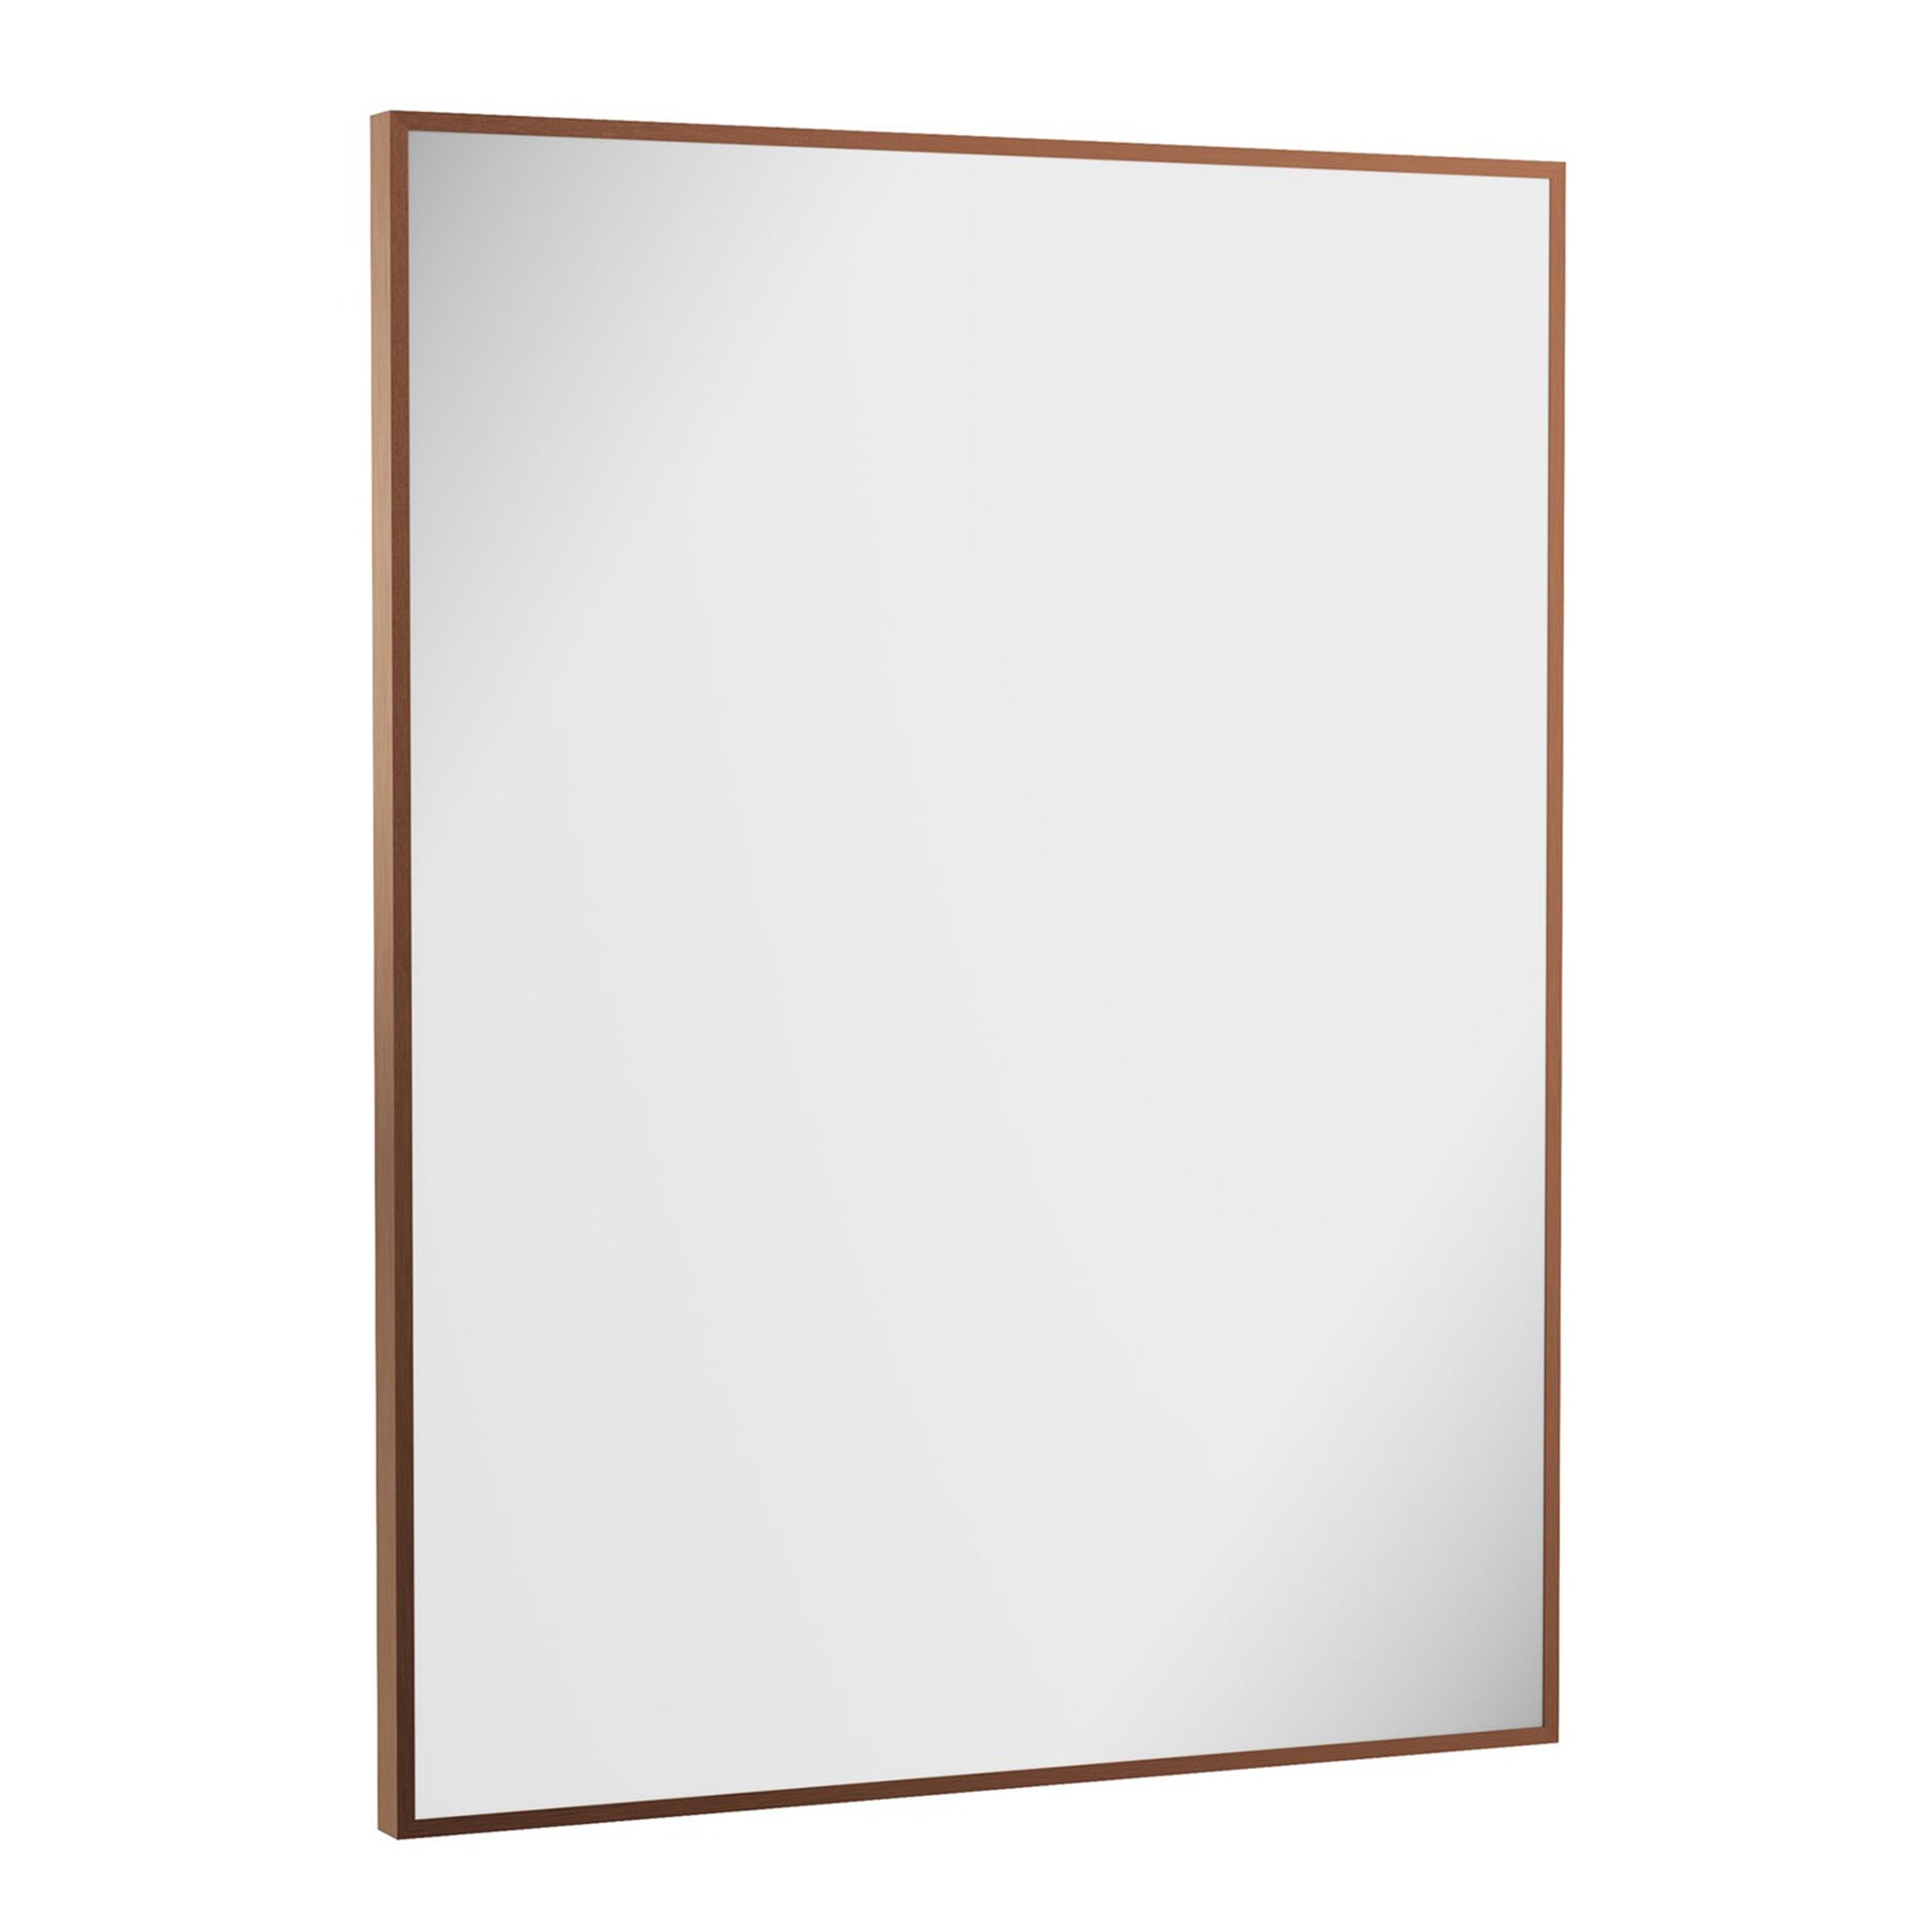 crosswater mpro non led mirror 700x900mm brushed bronze